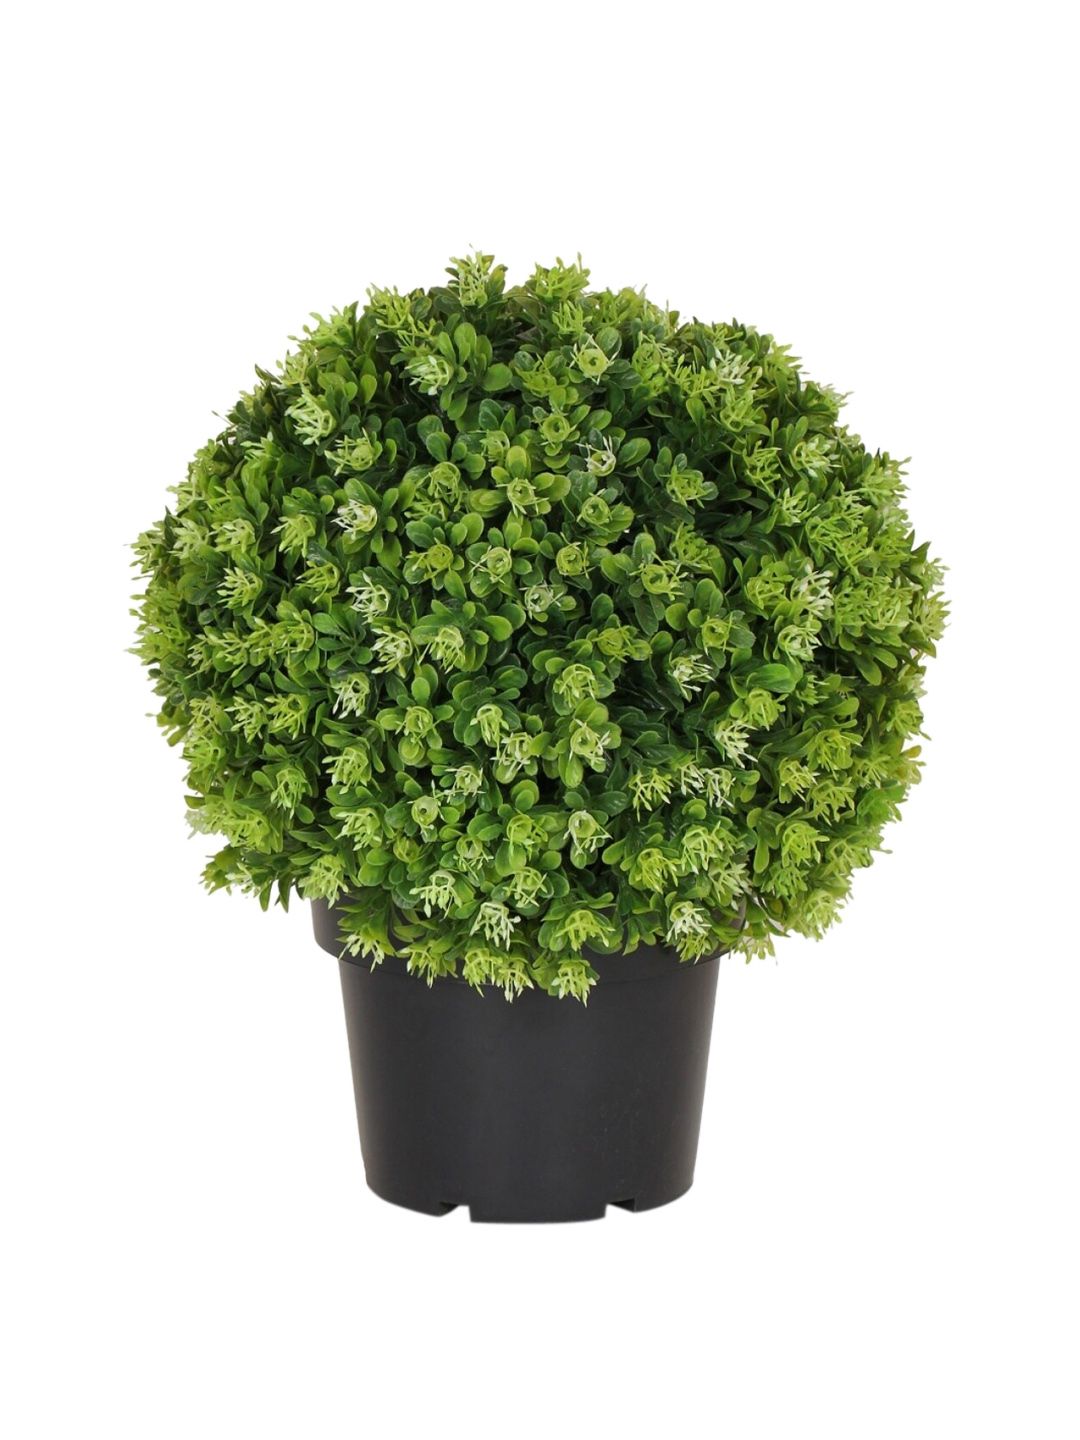 Home Centre Black & Green Hues Bean Ball Plastic Pot Price in India